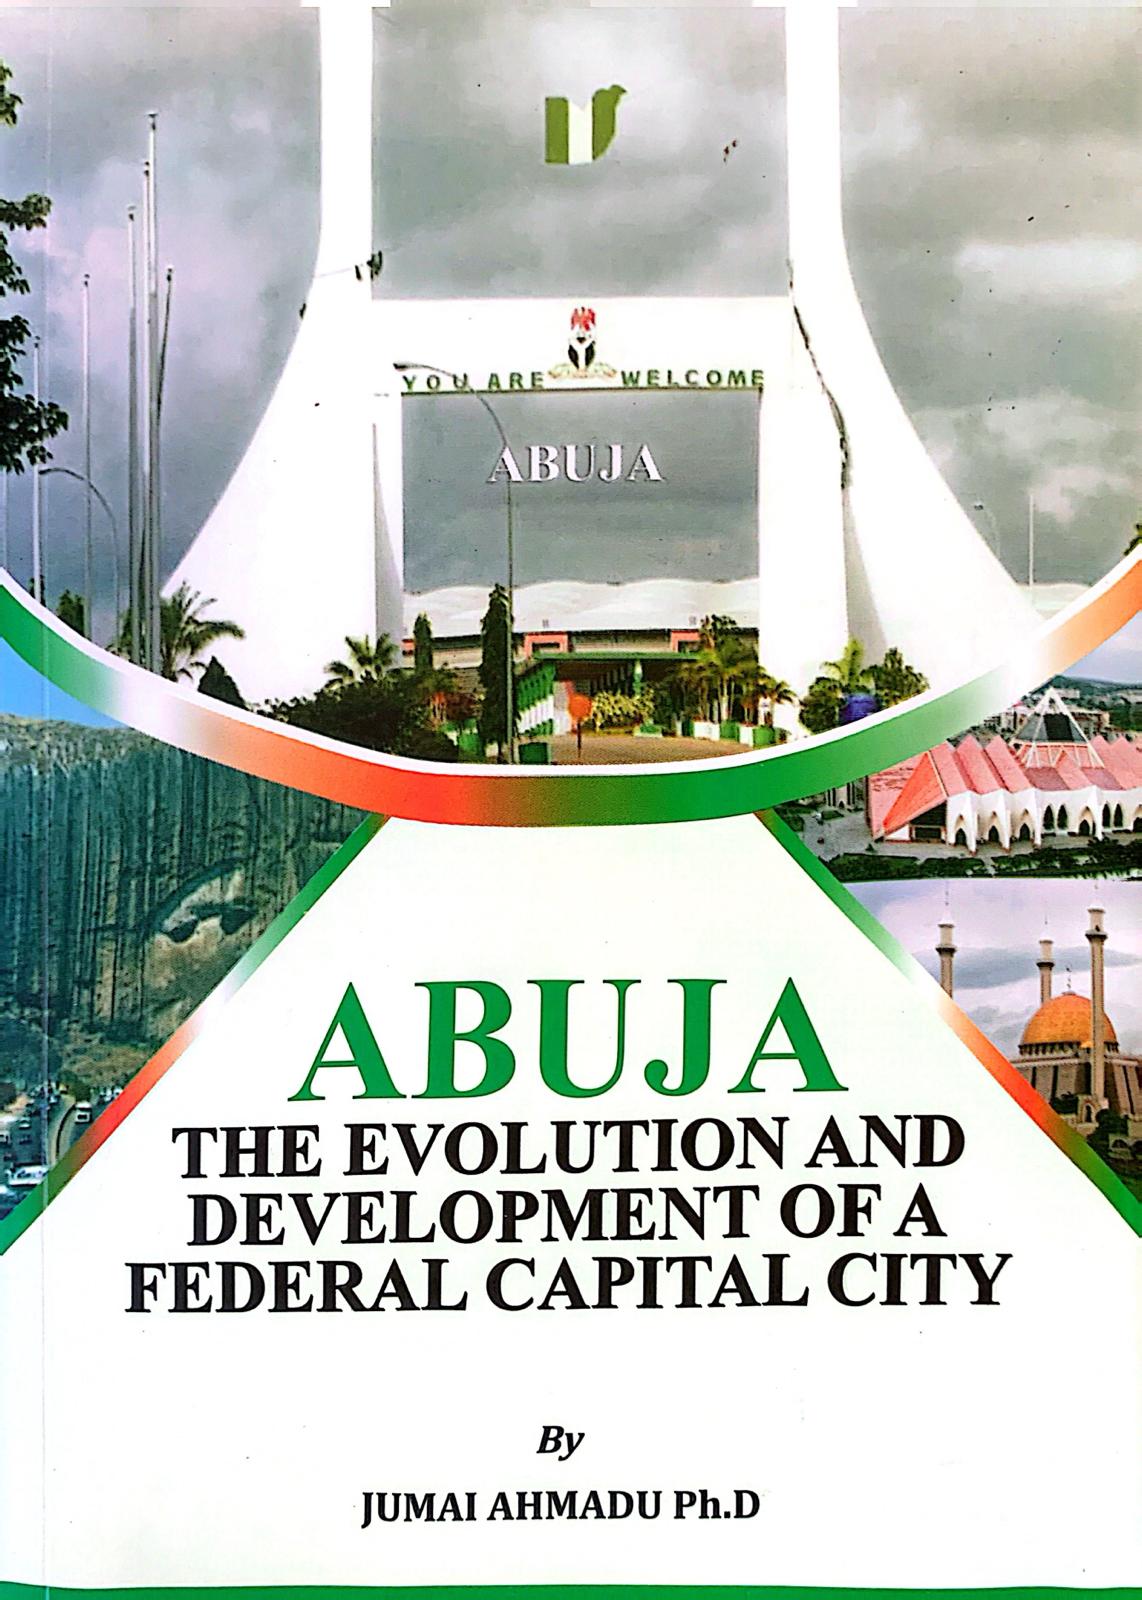 ABUJA: The Evolution and Development of a Federal Capital City